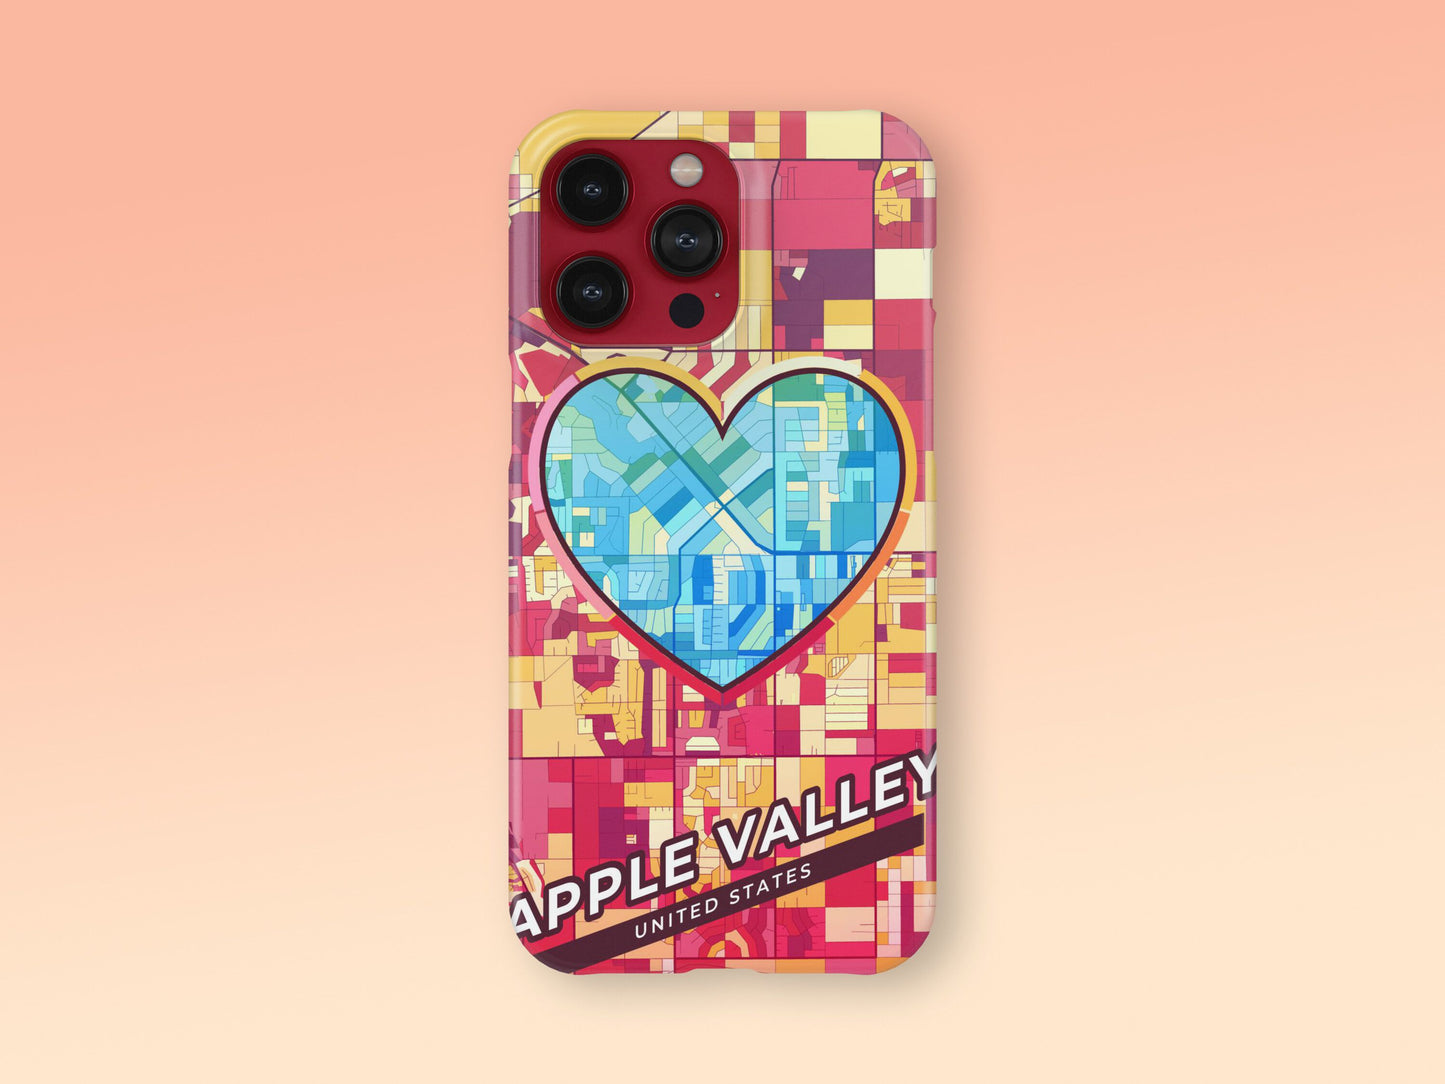 Apple Valley California slim phone case with colorful icon. Birthday, wedding or housewarming gift. Couple match cases. 2